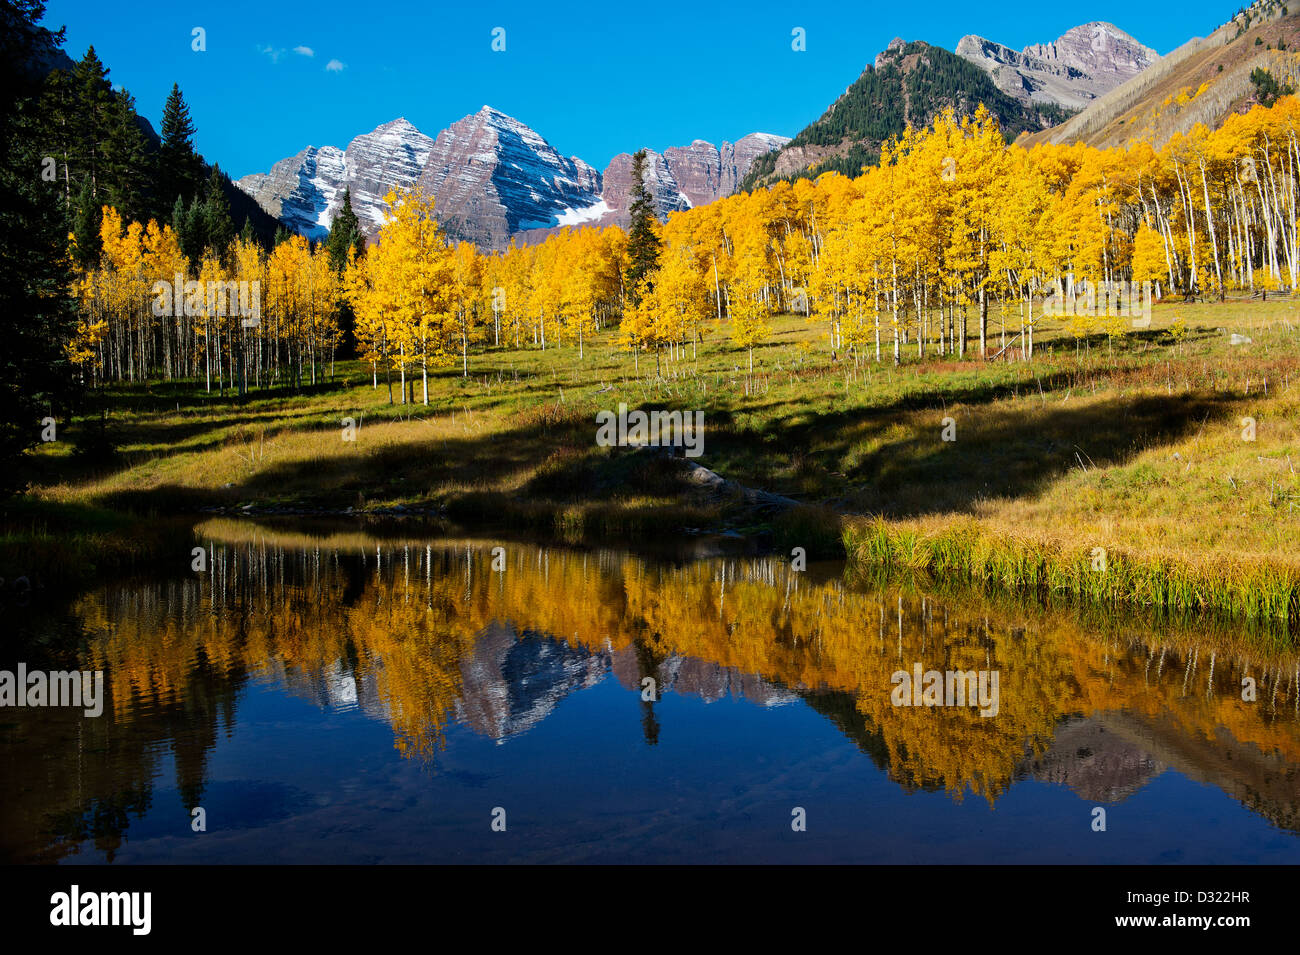 Yellow trees and mountains reflected in still water Stock Photo